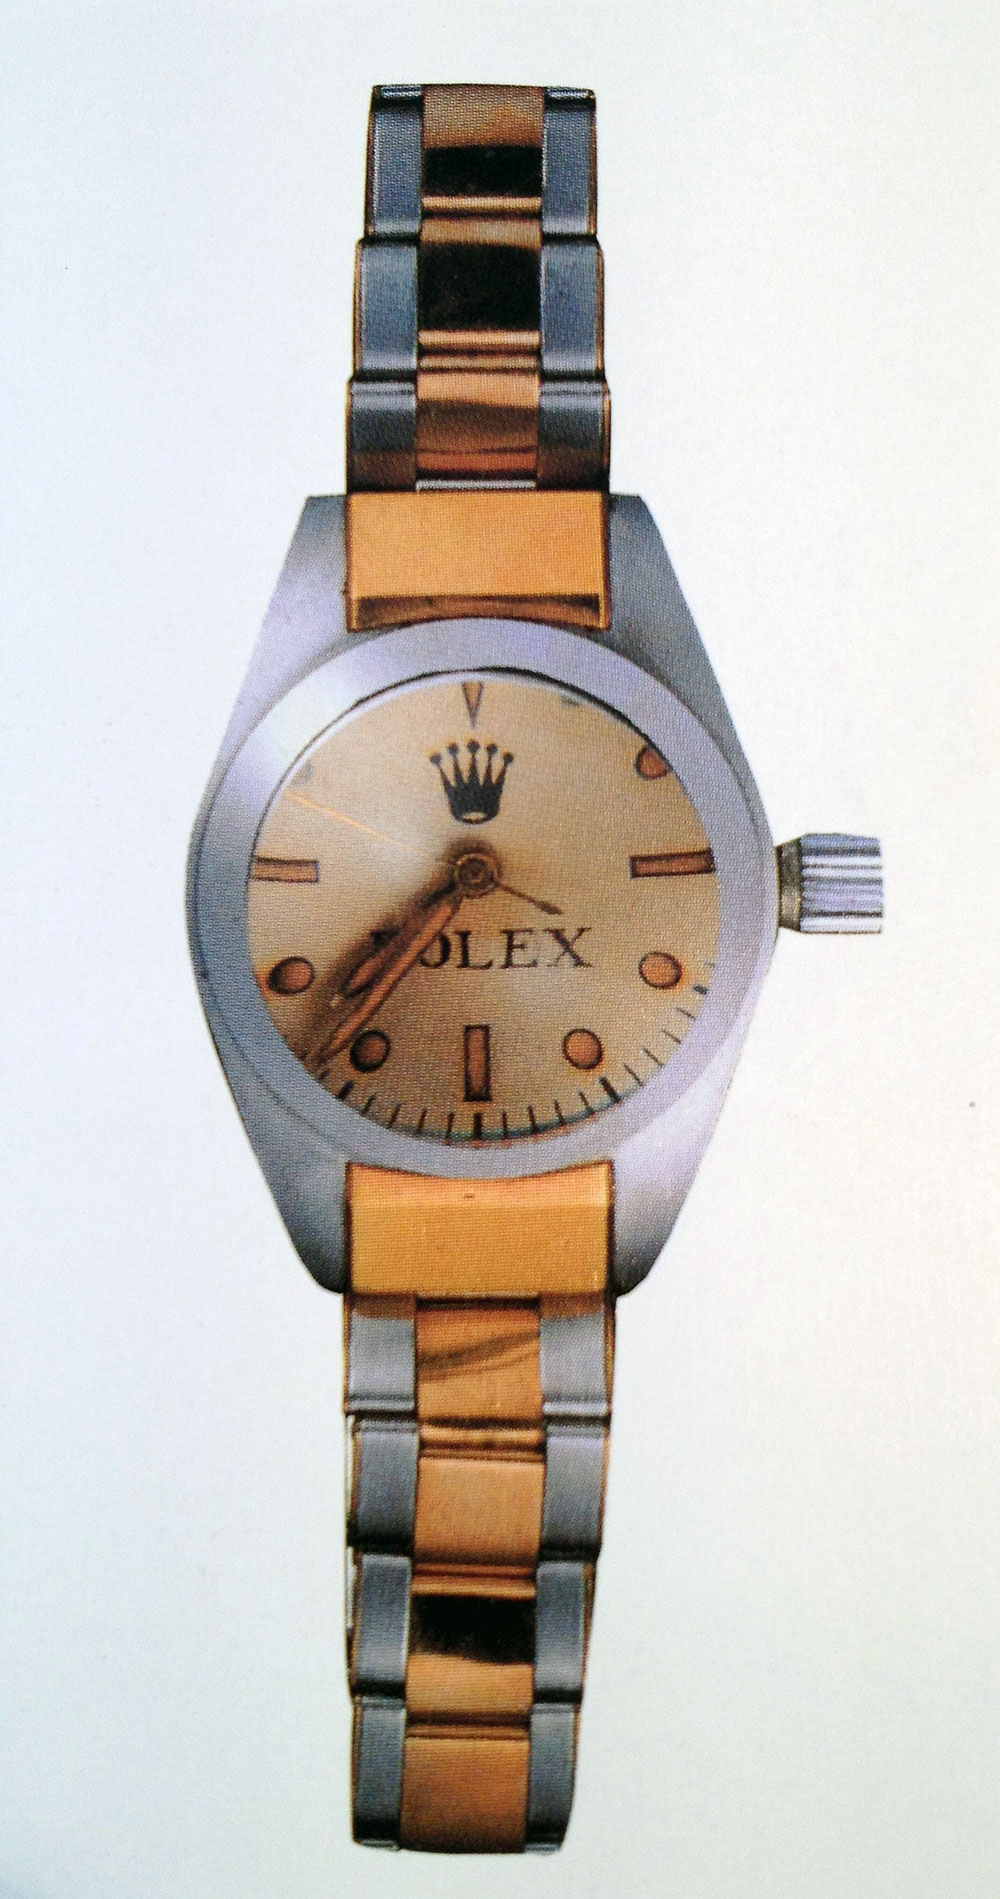 The Rolex Deep Sea Special Story of Piccard & Walsh. - Rolex